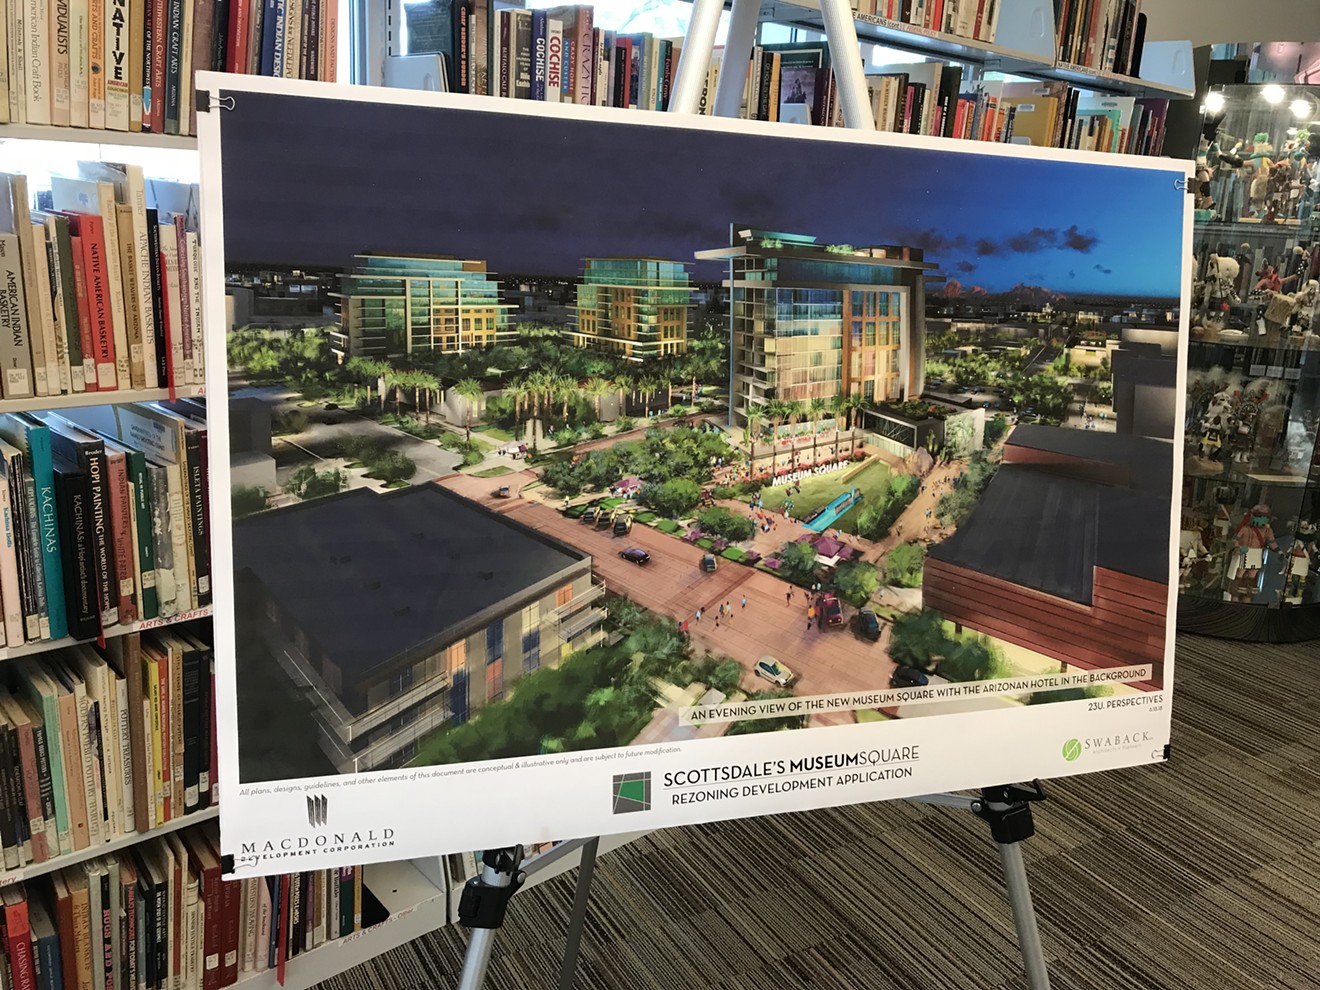 One of several renderings shown during a community open house for the Museum Square project.